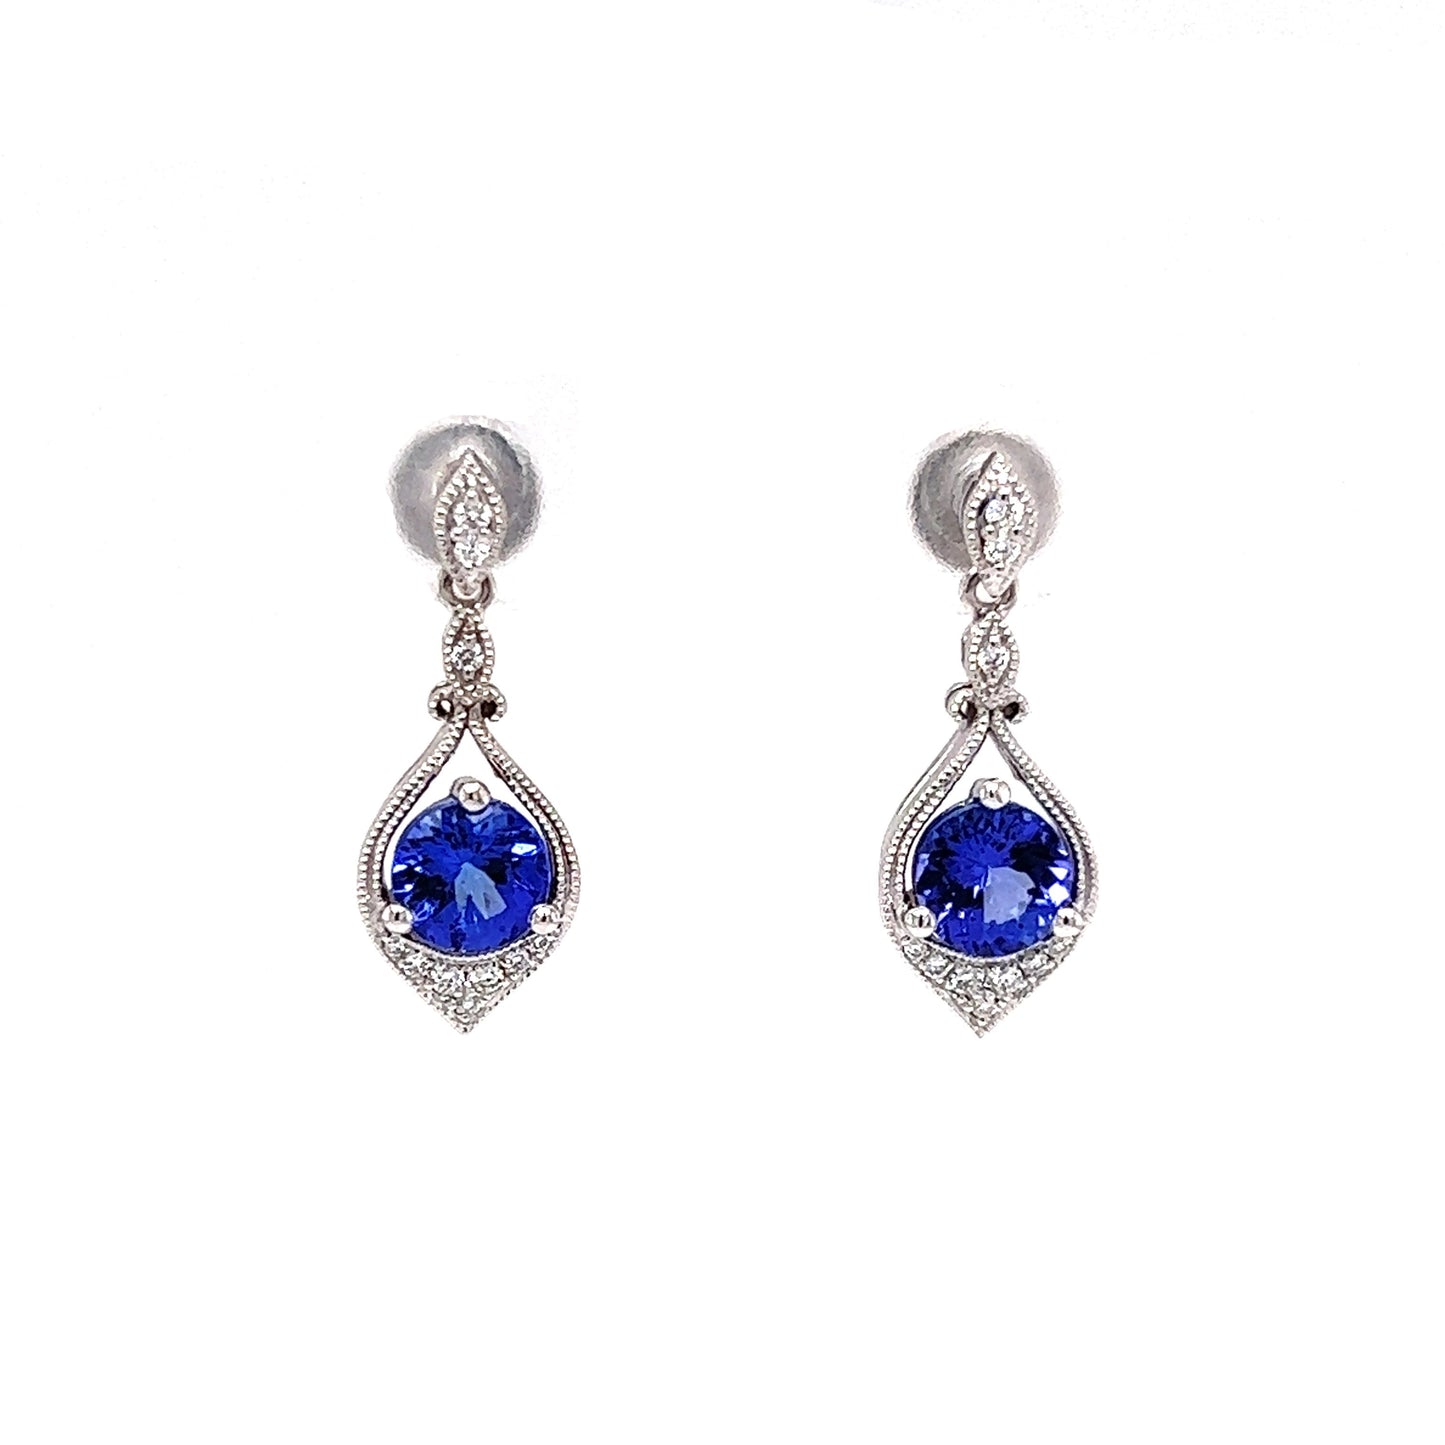 Round Tanzanite Drop Earrings with Twenty Diamonds in 14K White Gold Hanging Front View